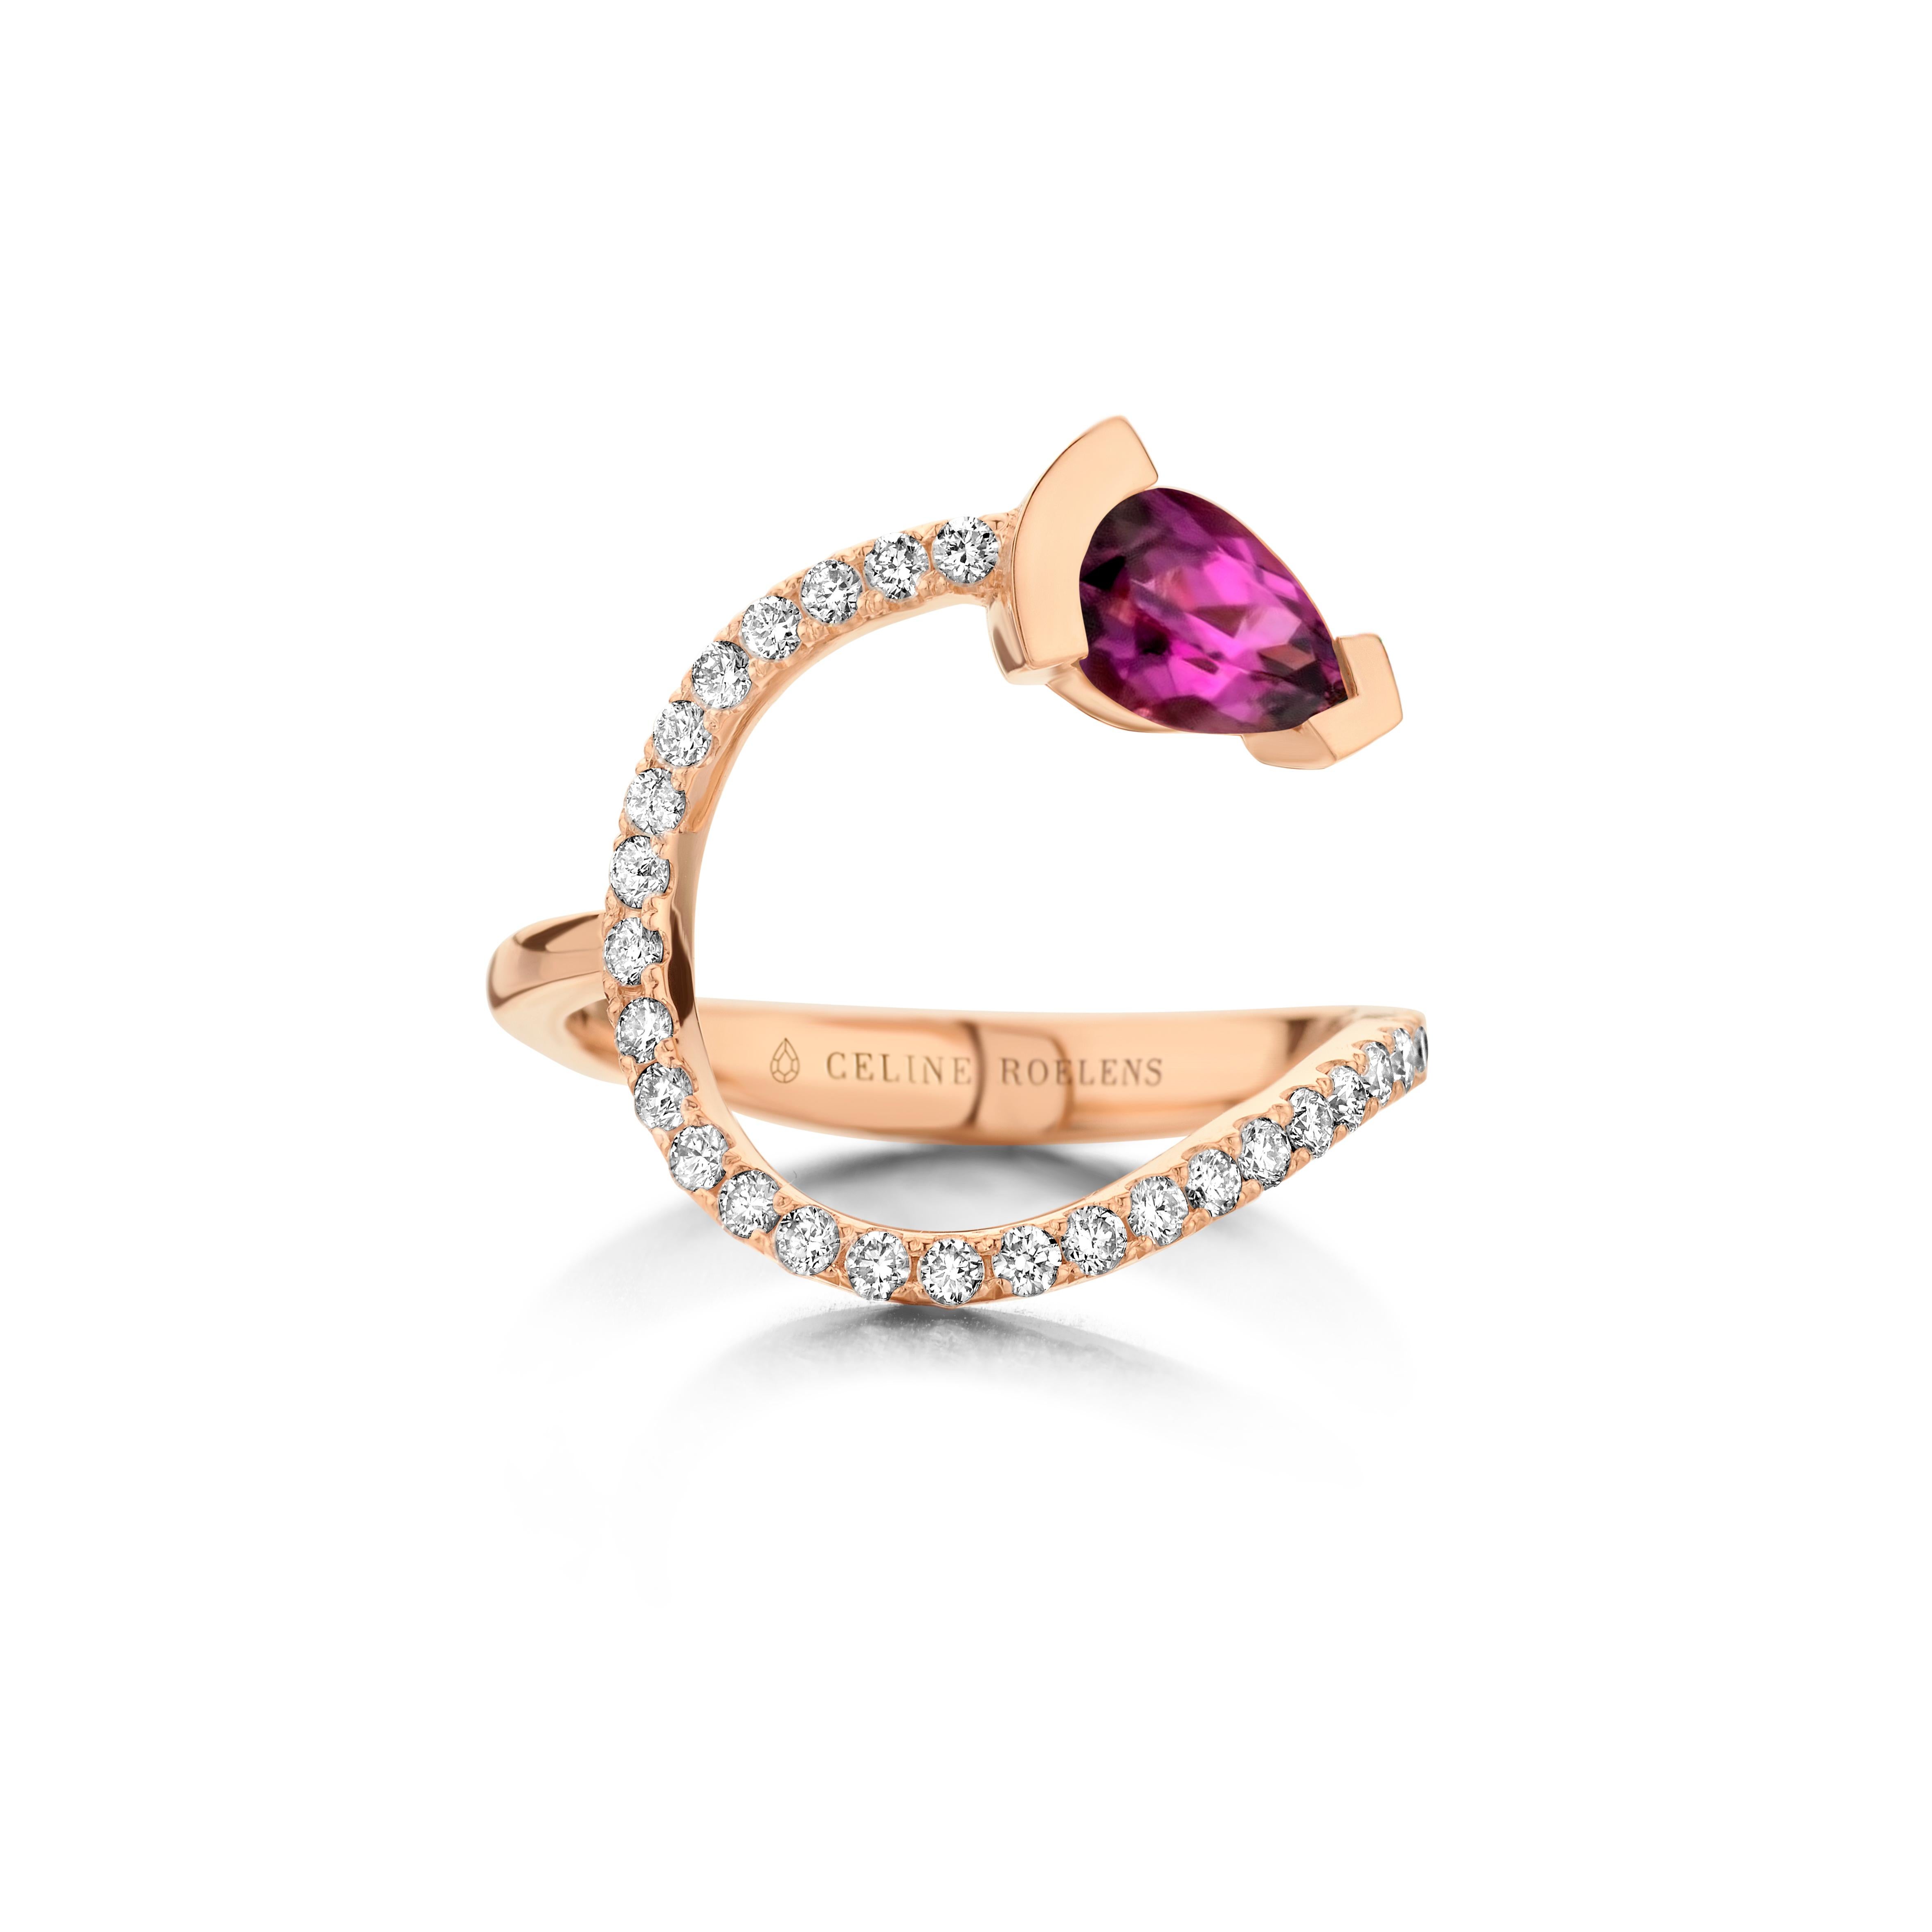 ADELINE curved ring in 18Kt yellow gold set with a pear shaped Royal purple garnet and 0,33 Ct of white brilliant cut diamonds - VS F quality.